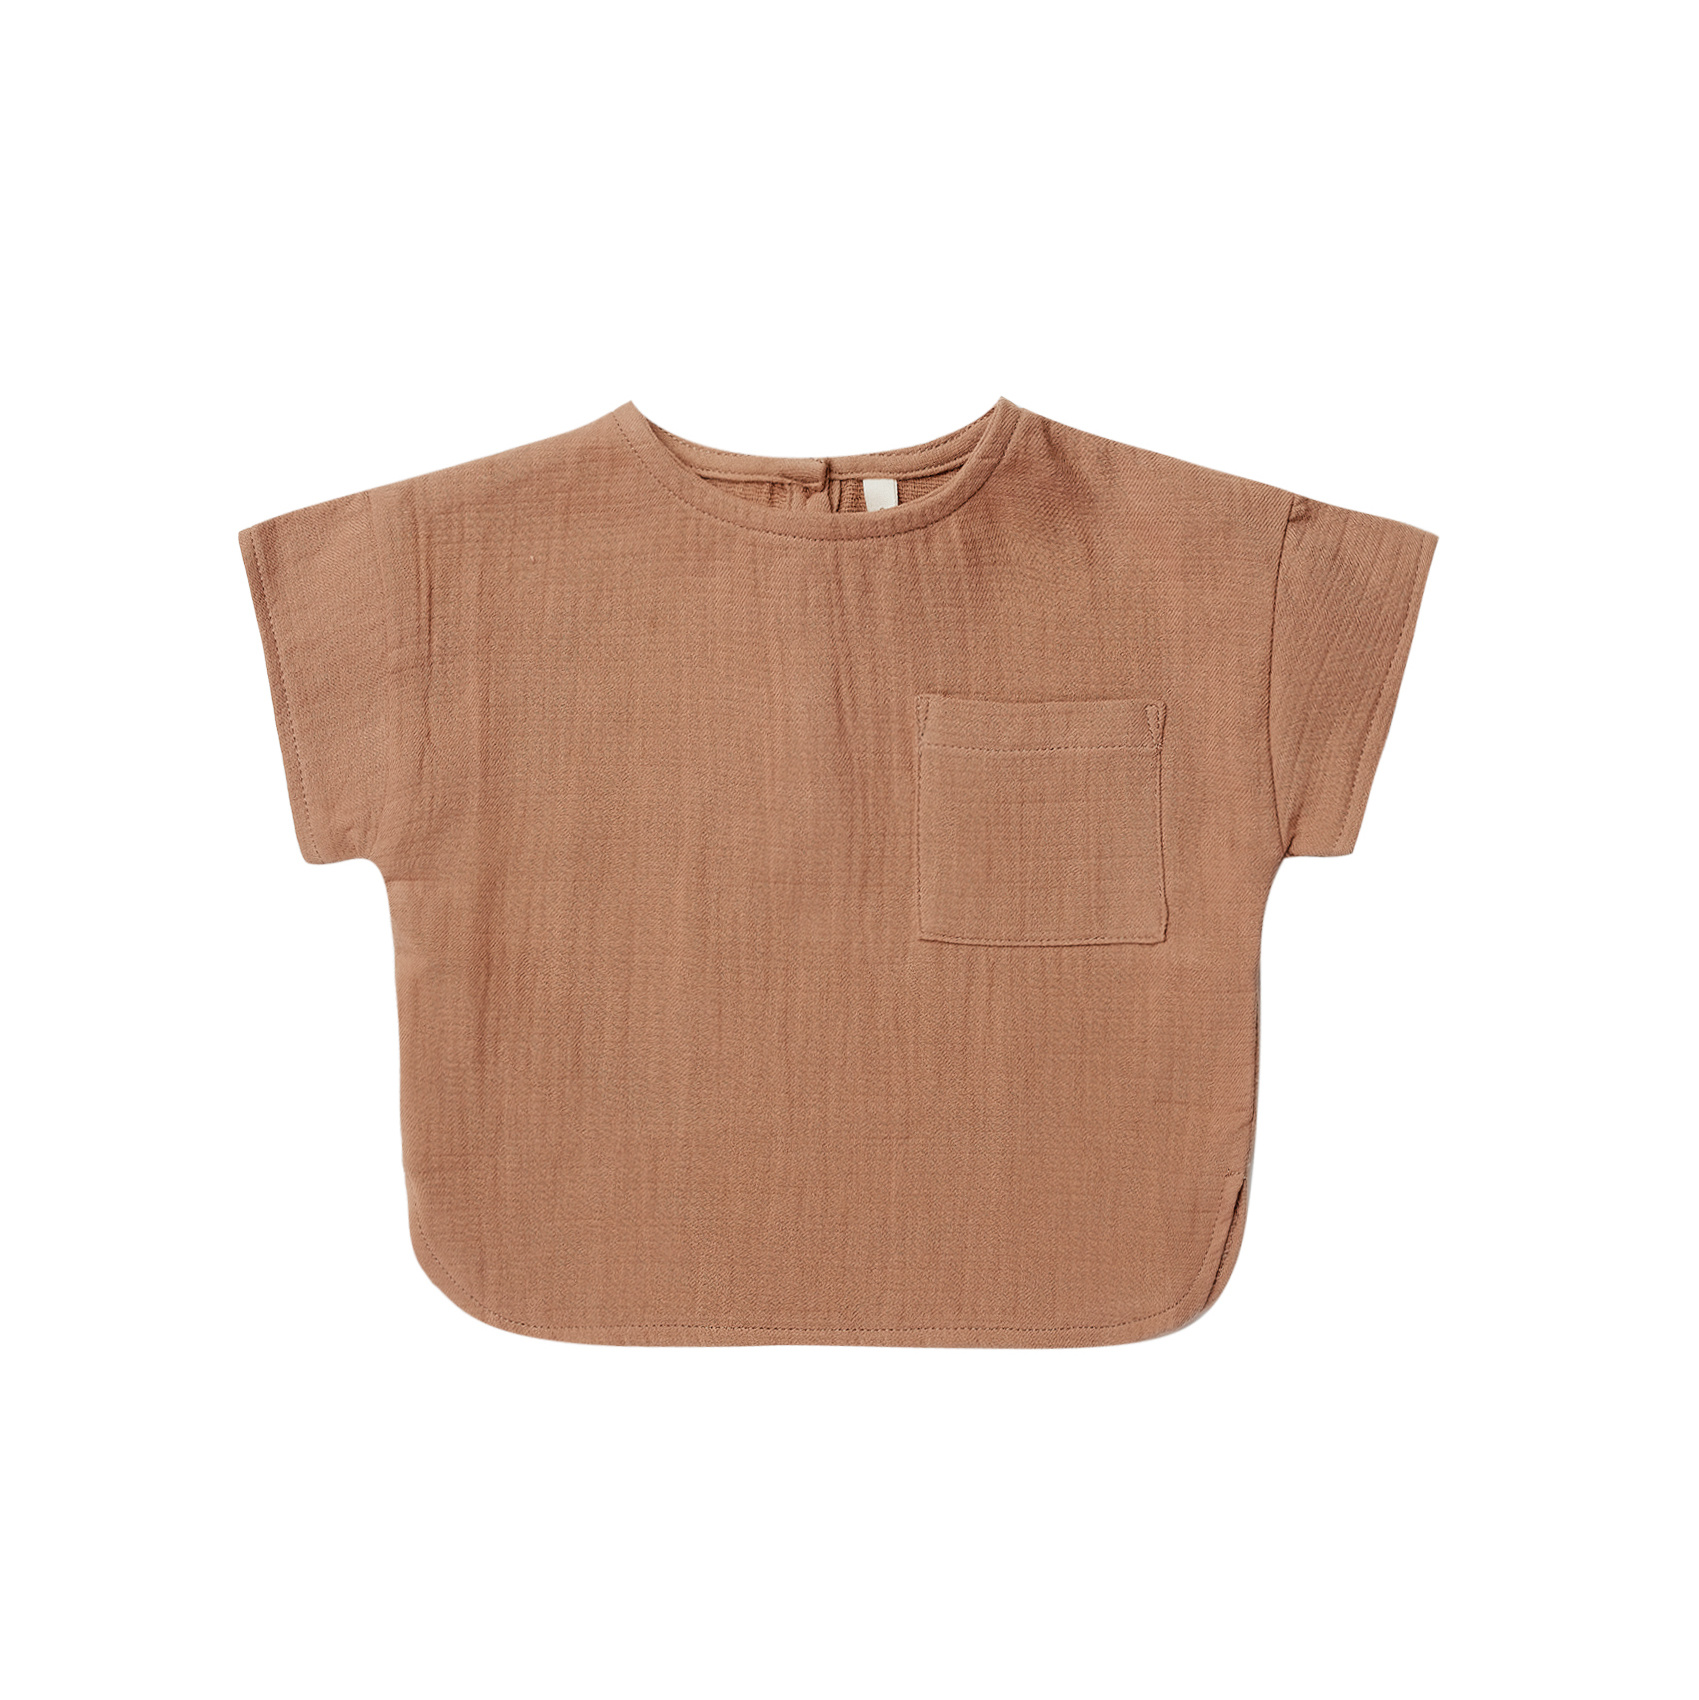 Quincy Mae Woven Boxy Top, Clay Charlotte et Charlie